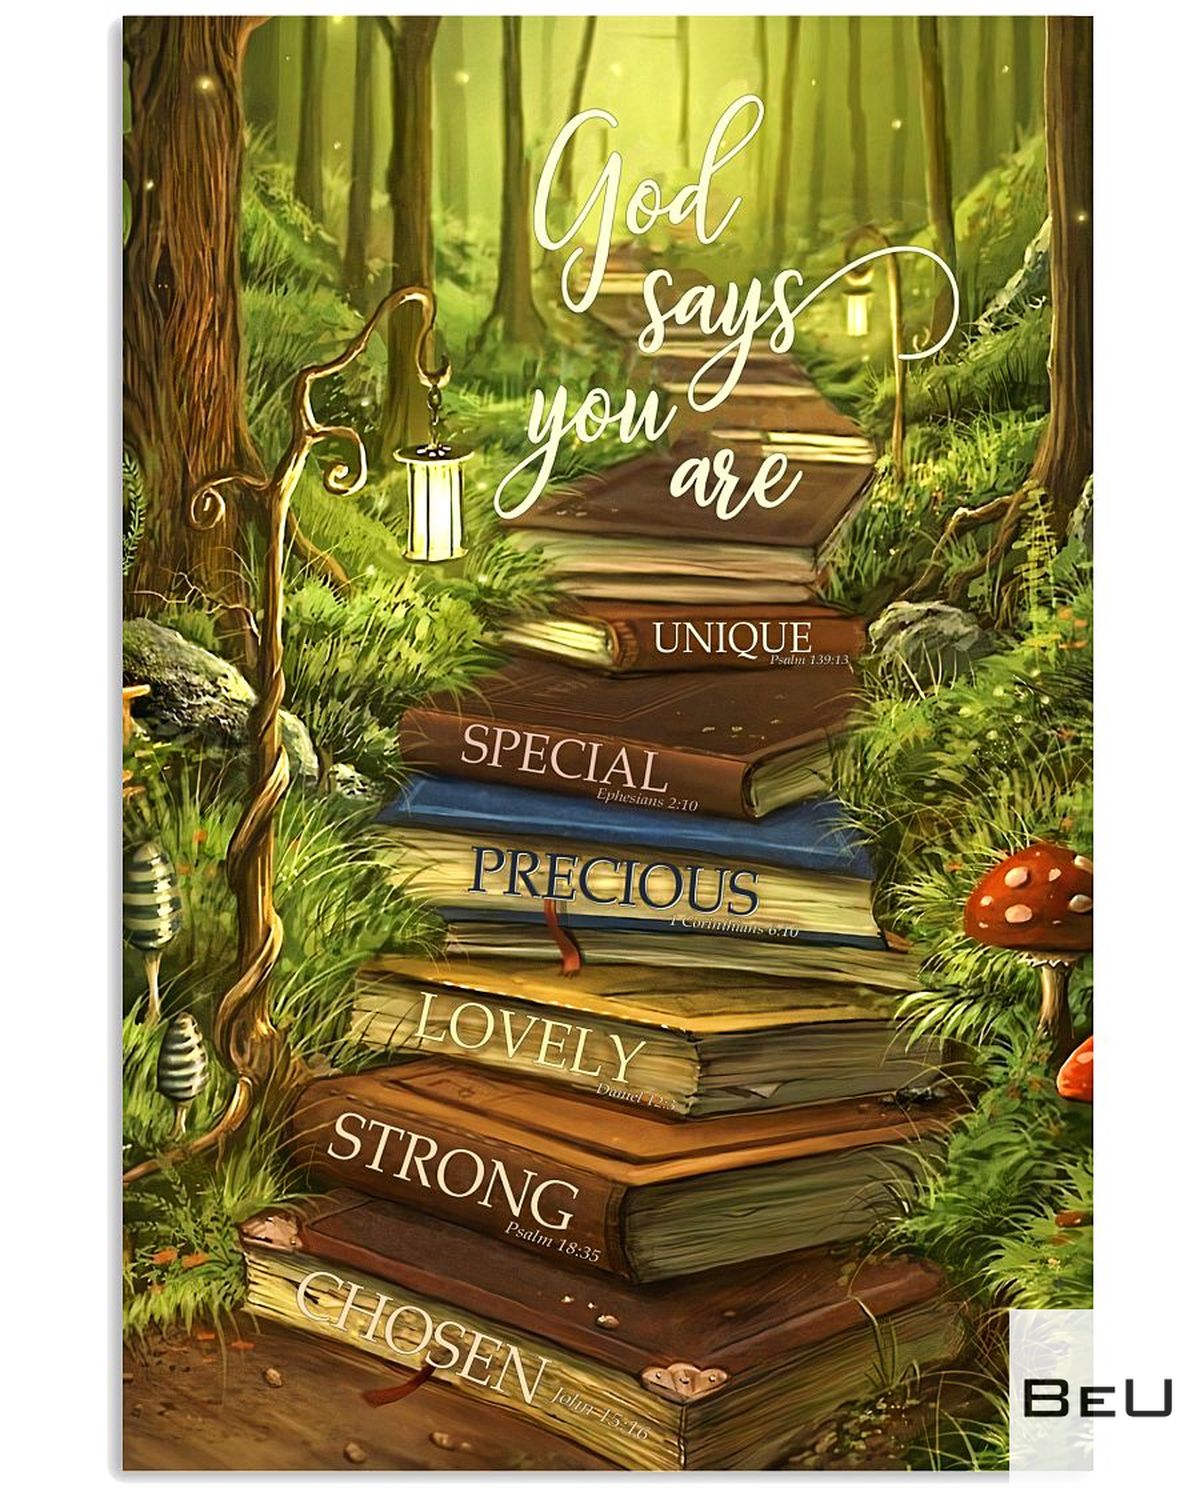 God Says You Are Unique Special Precious Lovely Strong Chosen Poster